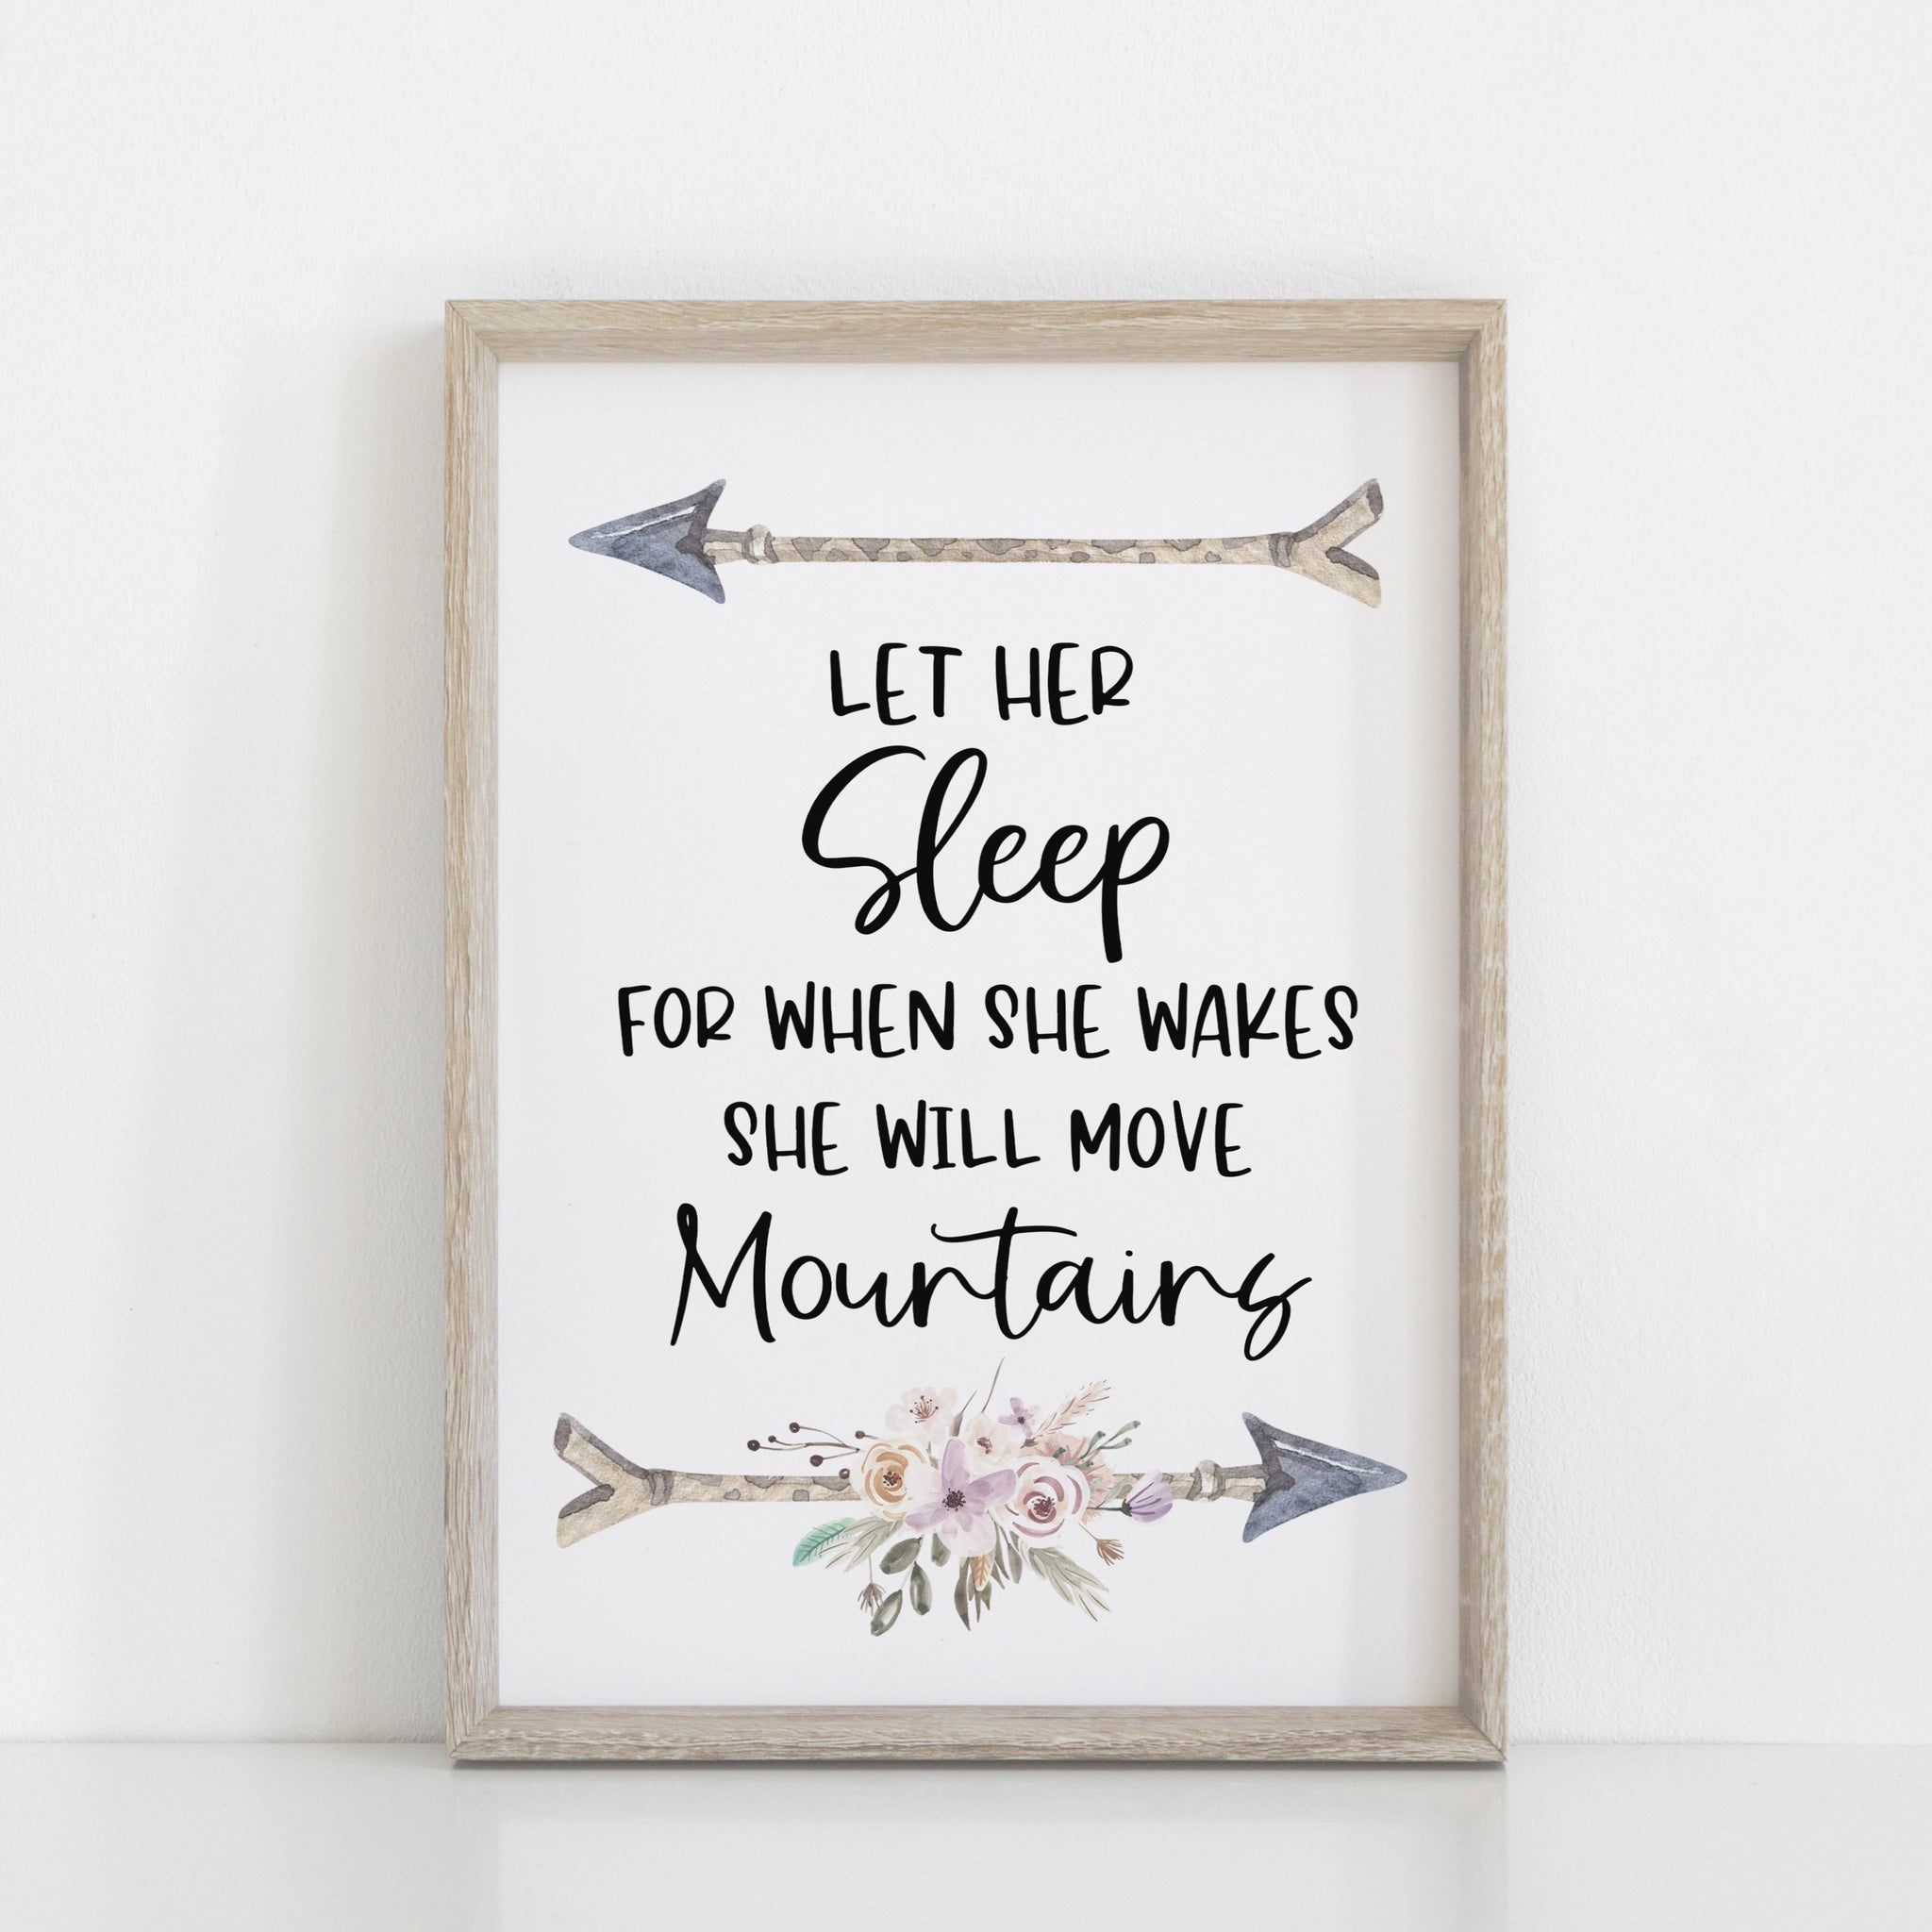 Let Her Sleep For When She Wakes, She Will Move Mountains, Pink Floral Girls Bedroom Wall Print, Nursery Decor Home Print